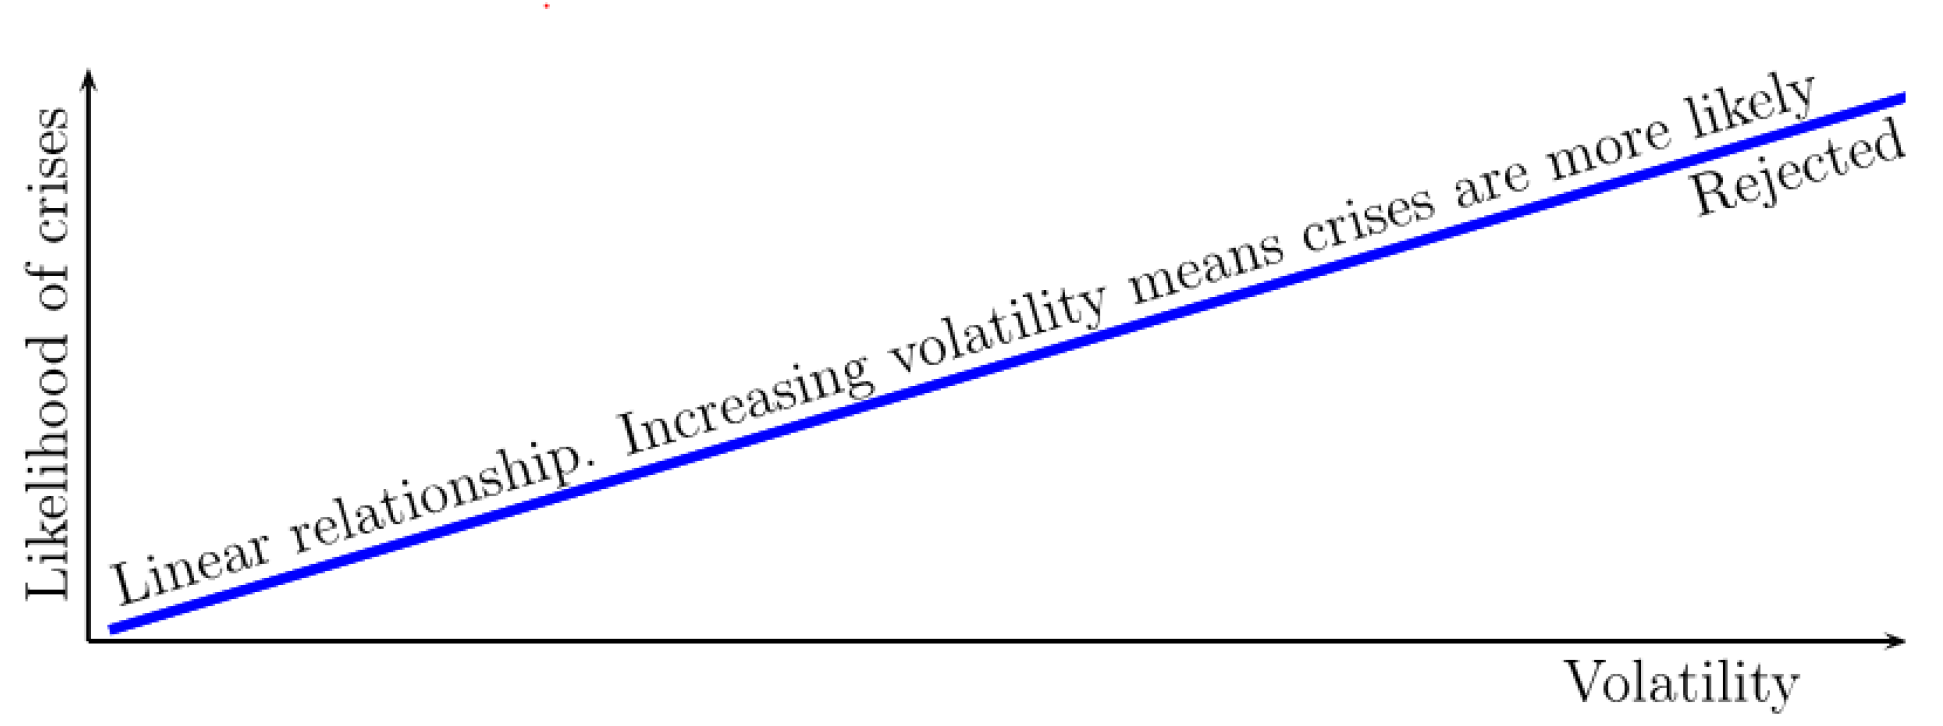 Figure 2. Volatility as predictor of crises. See accessible link for data description.